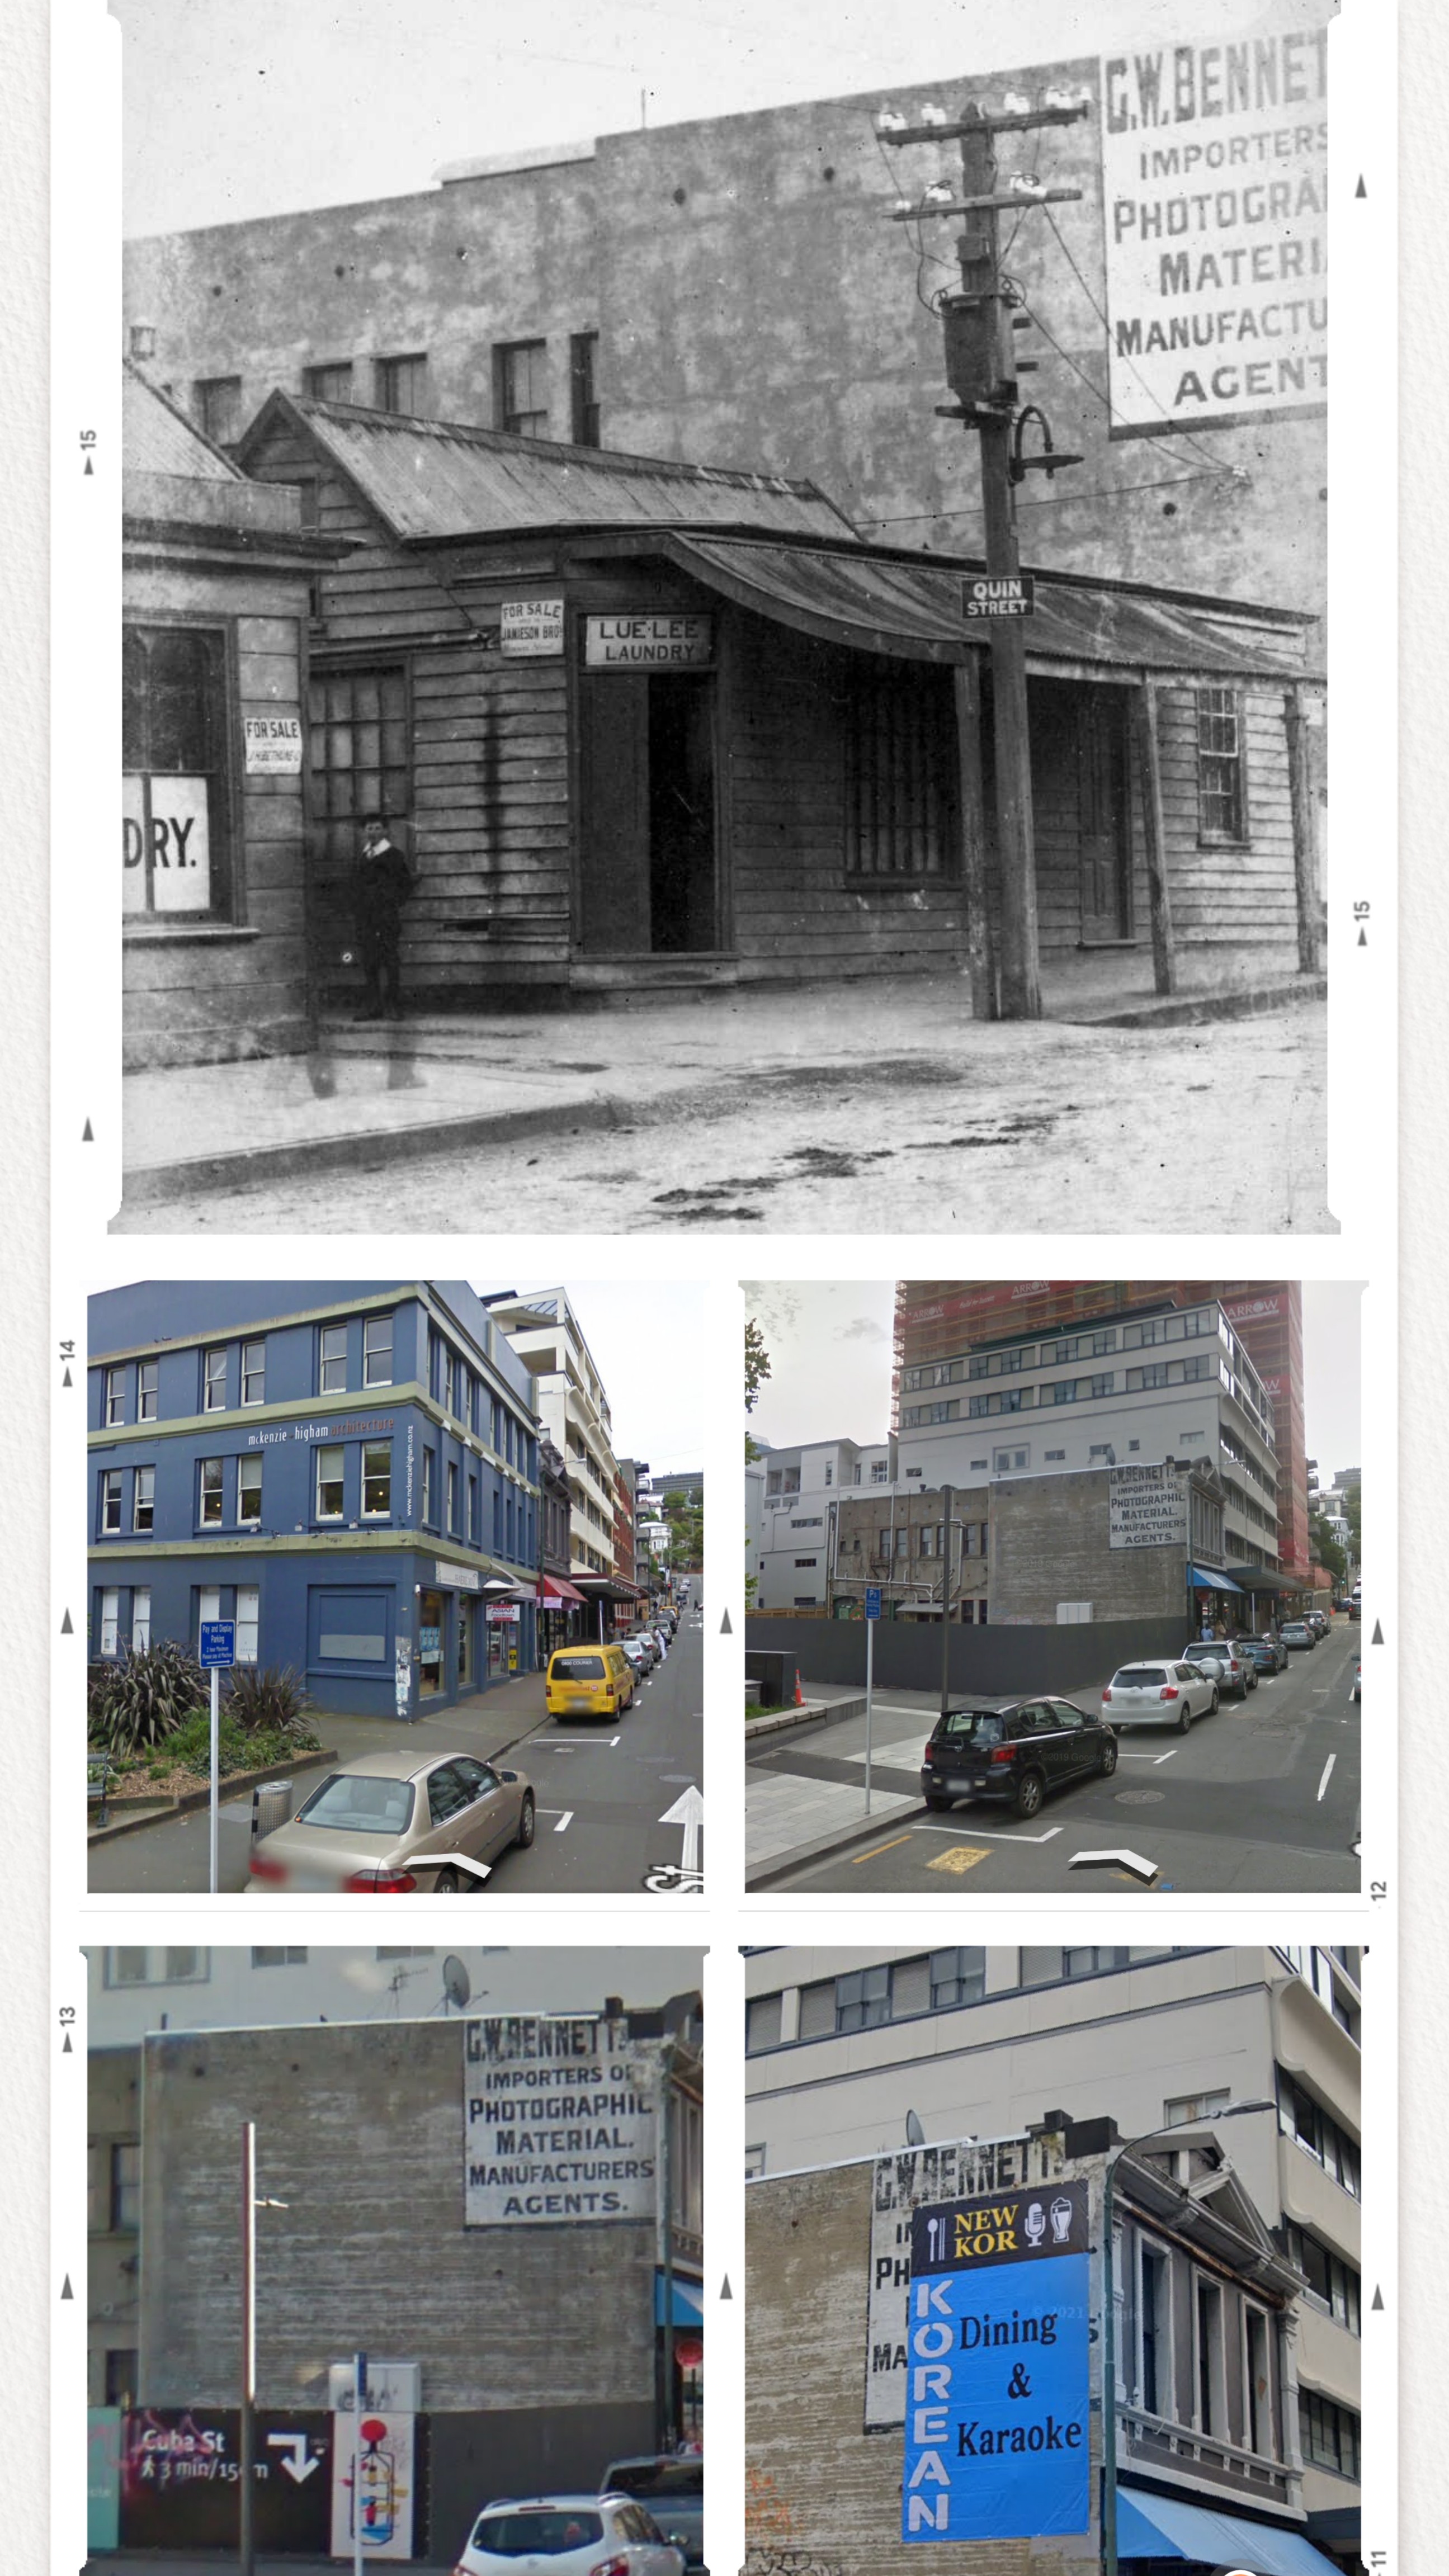 The 'G.W. Bennett' sign in Wellington through the ages in a collage of photos